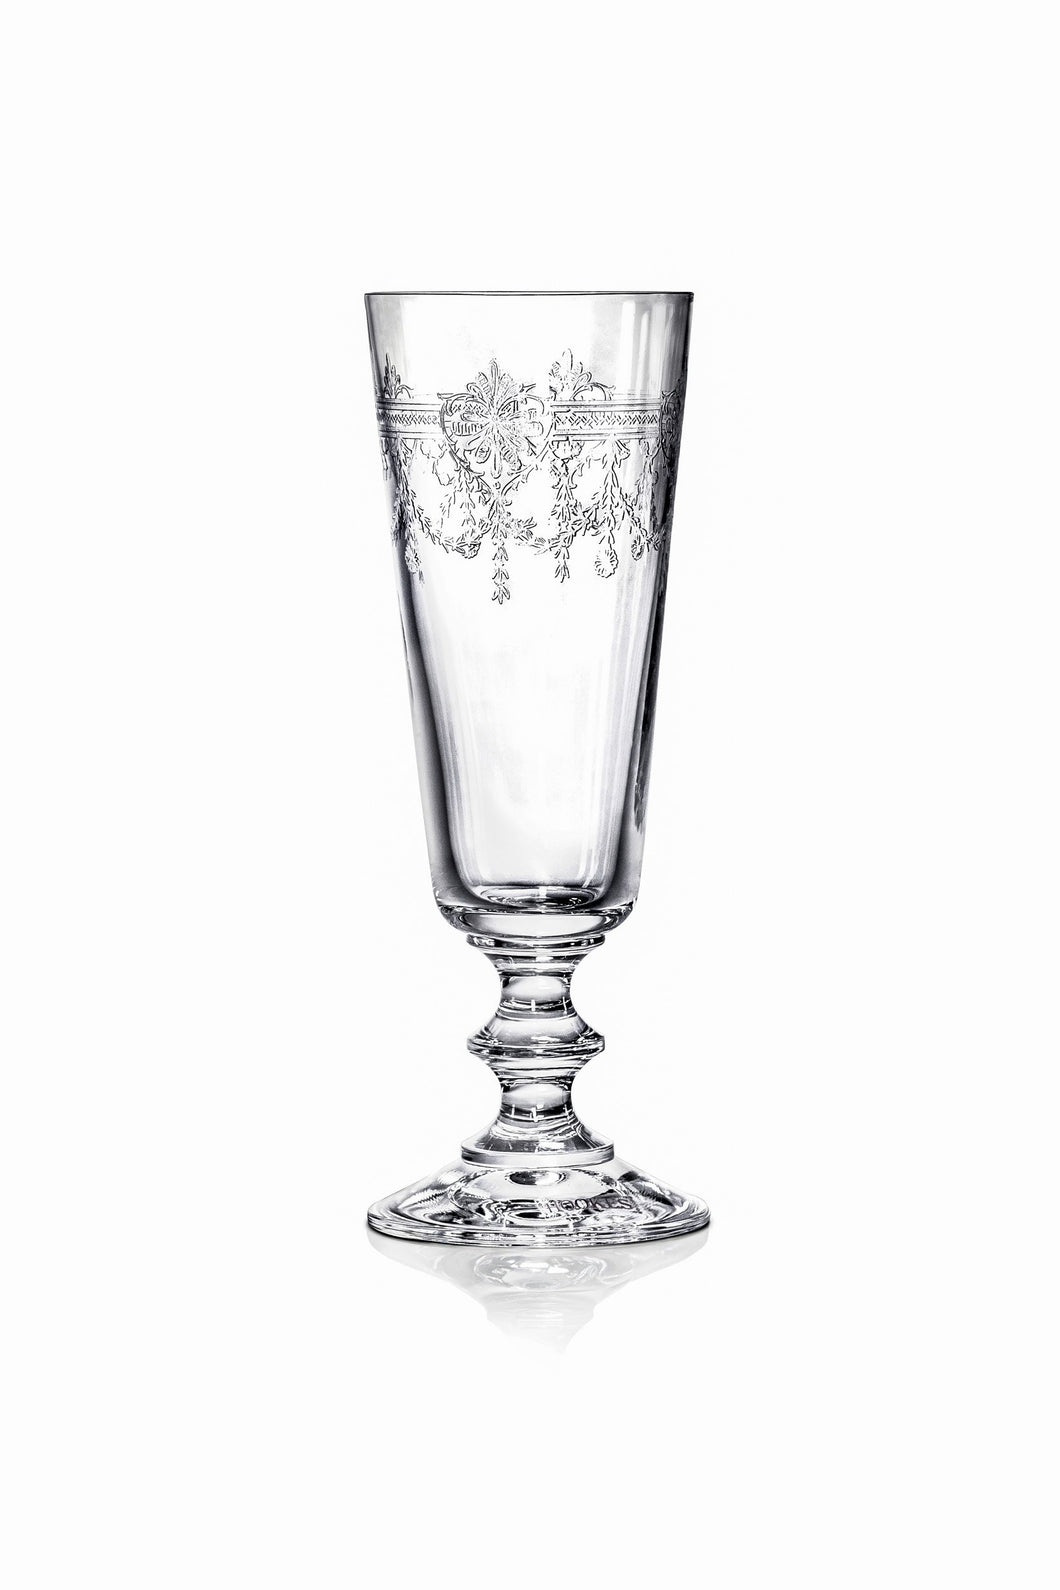 Rustic Victorian Engraved Champagne Flute